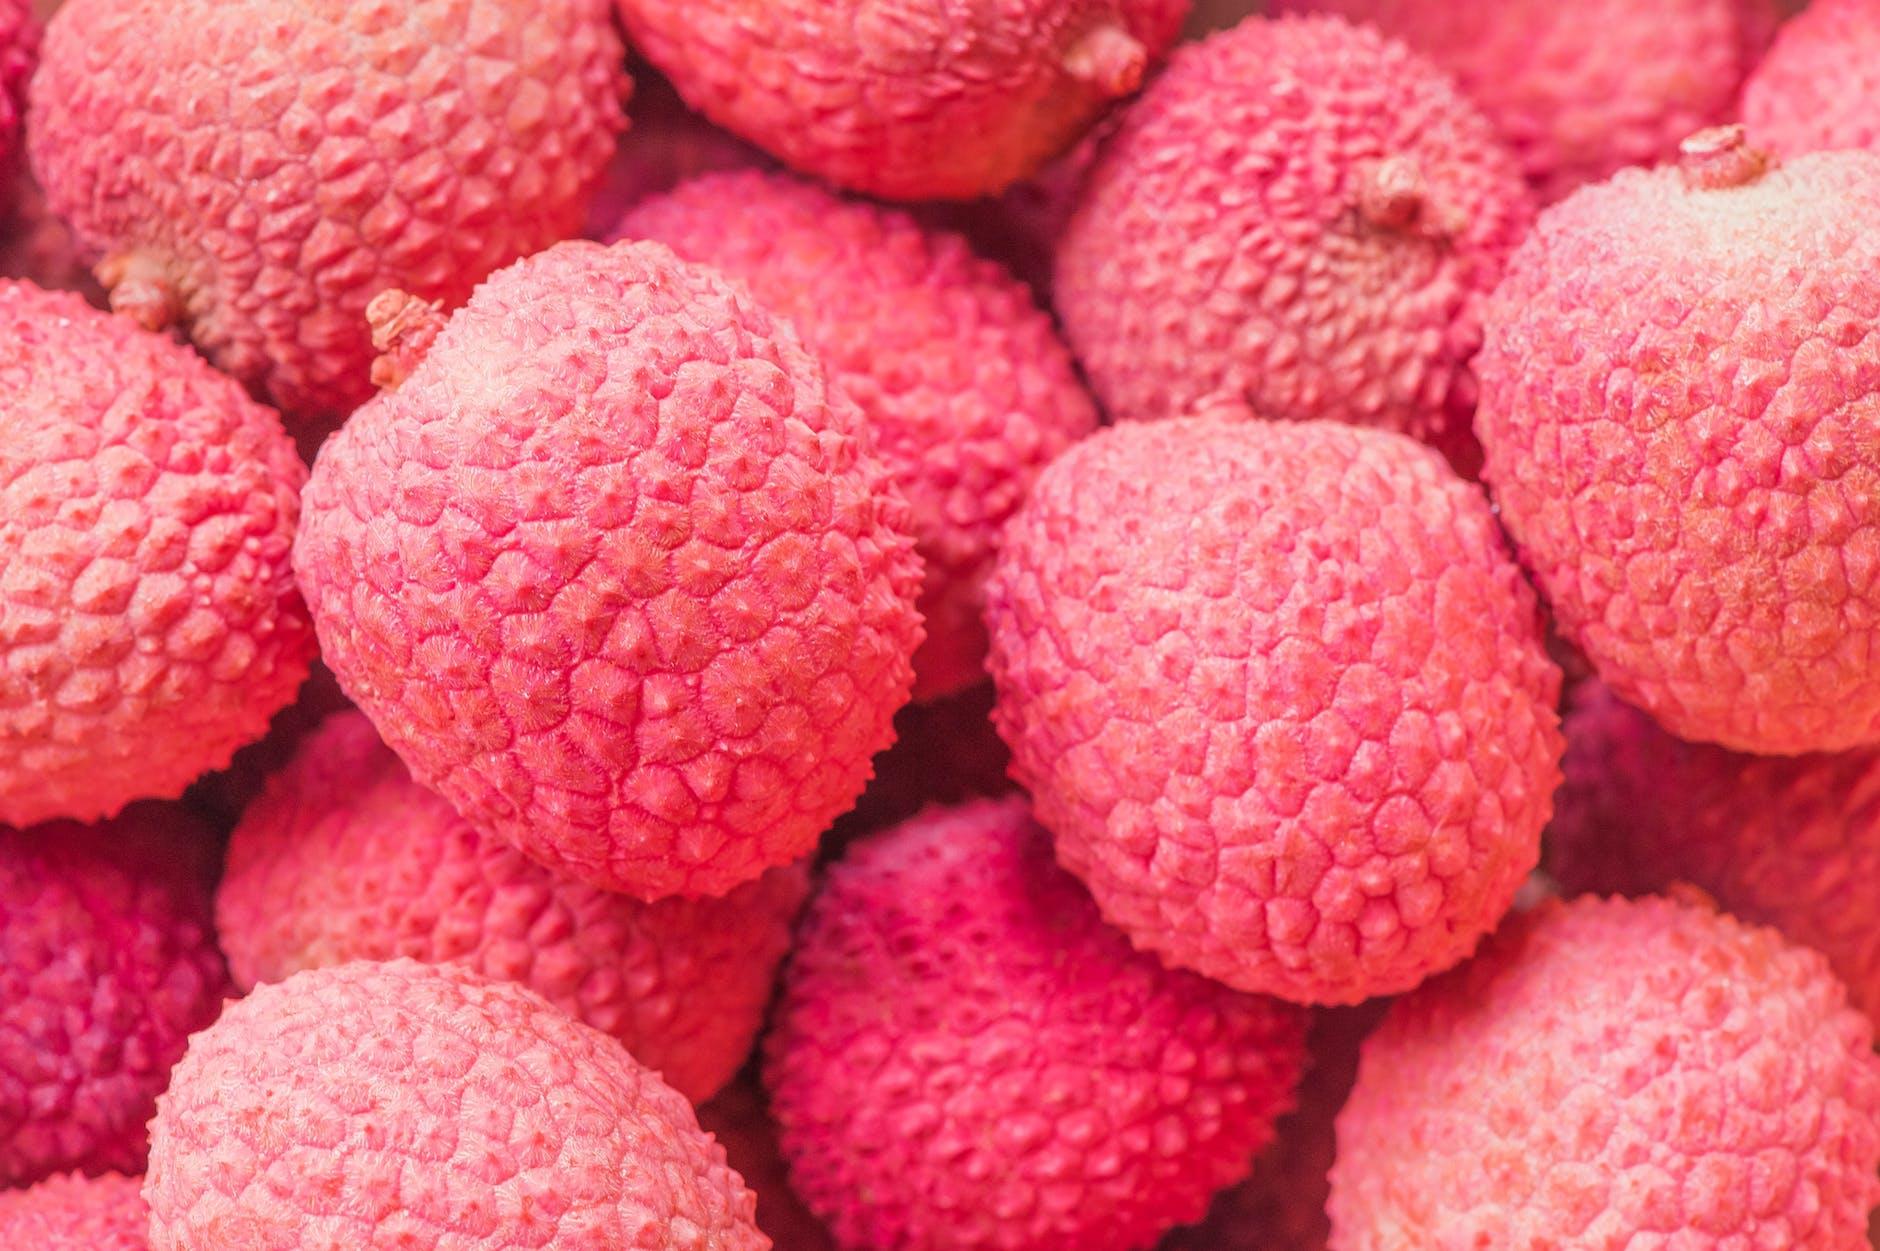 bunch of lychee fruits 
Photo by Pixabay on Pexels.com